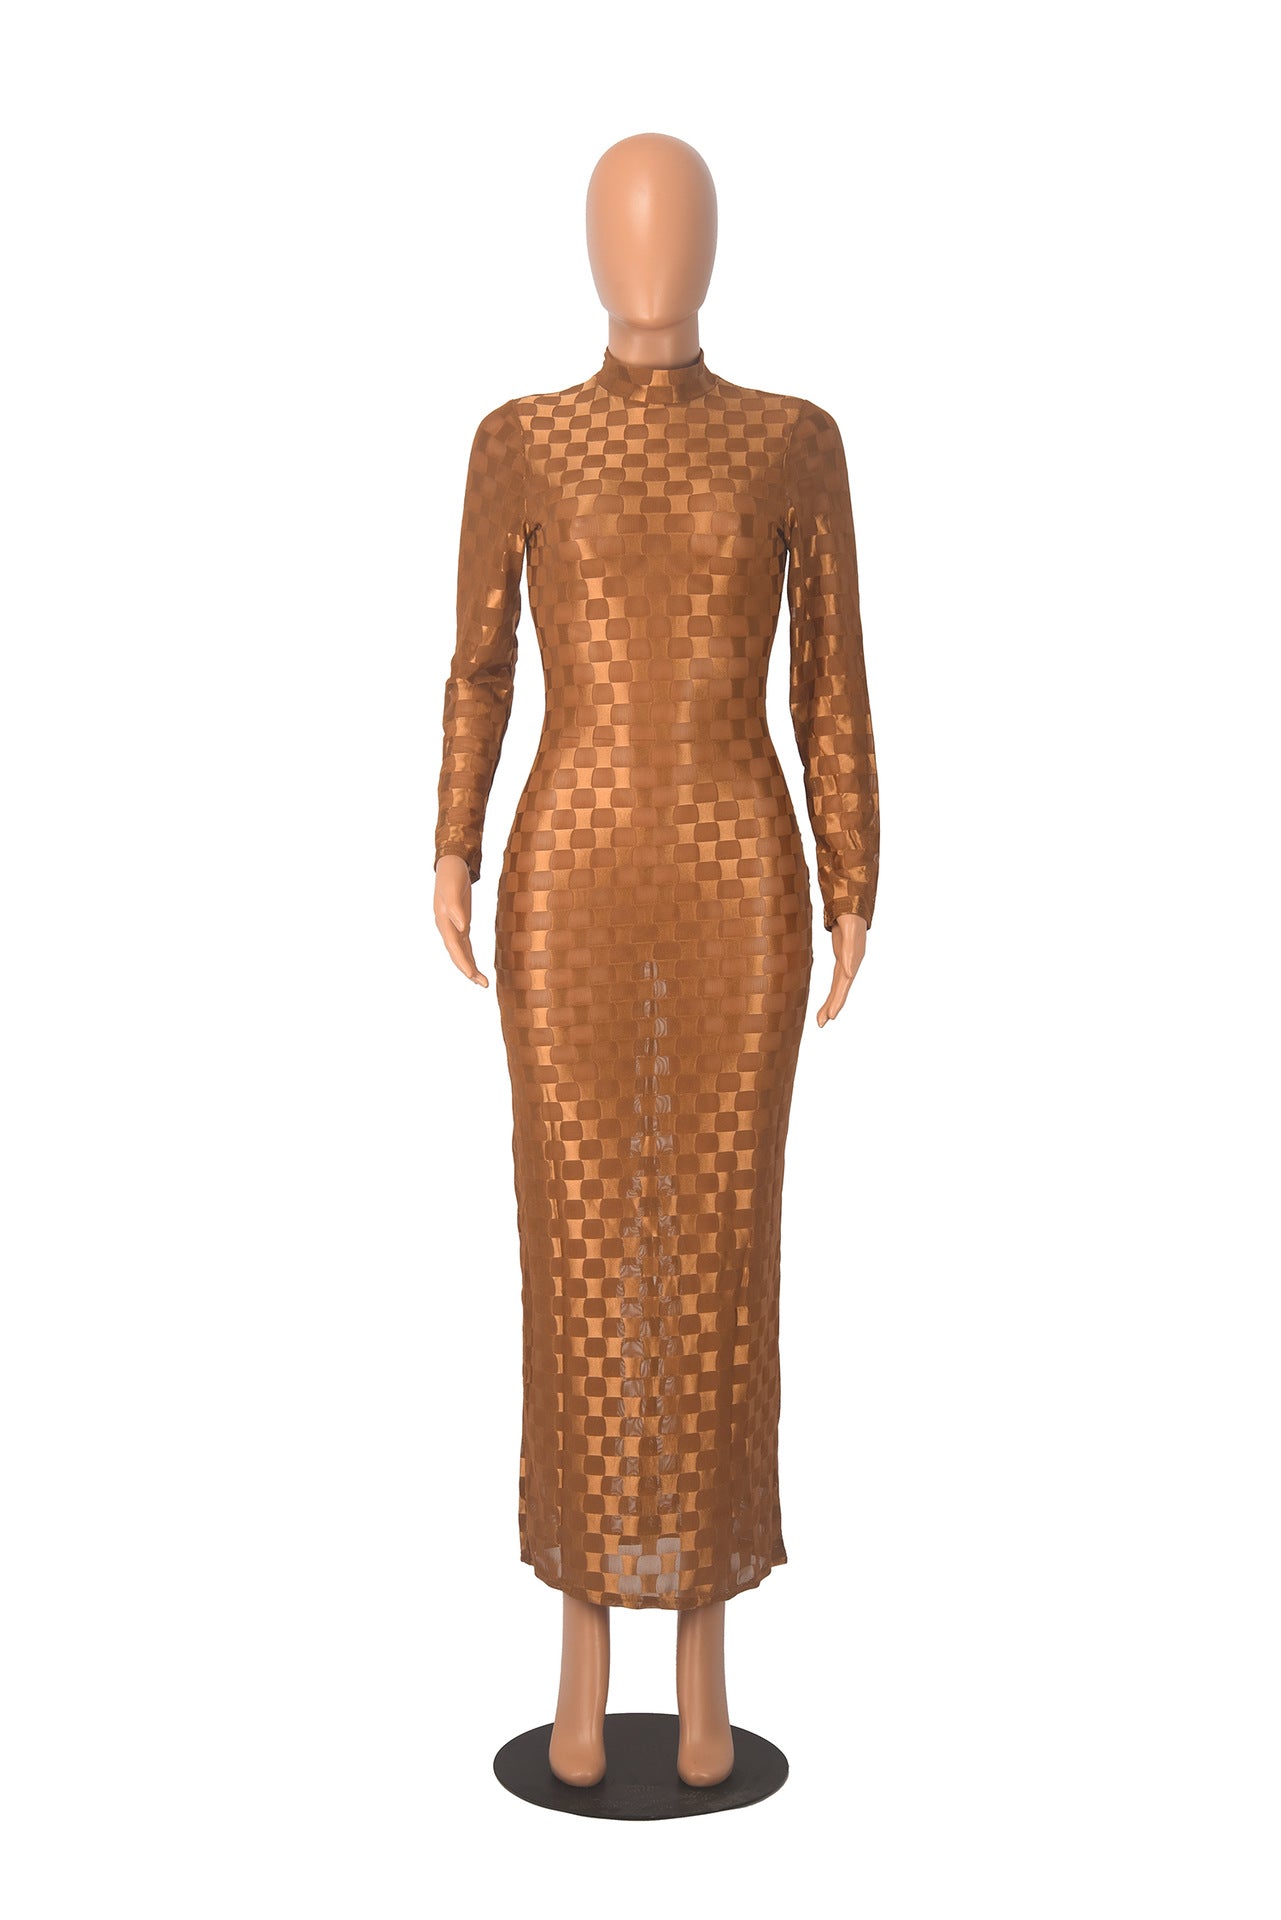 BamBam Autumn Fashionable And Sexy Long Evening Gown For Women - BamBam